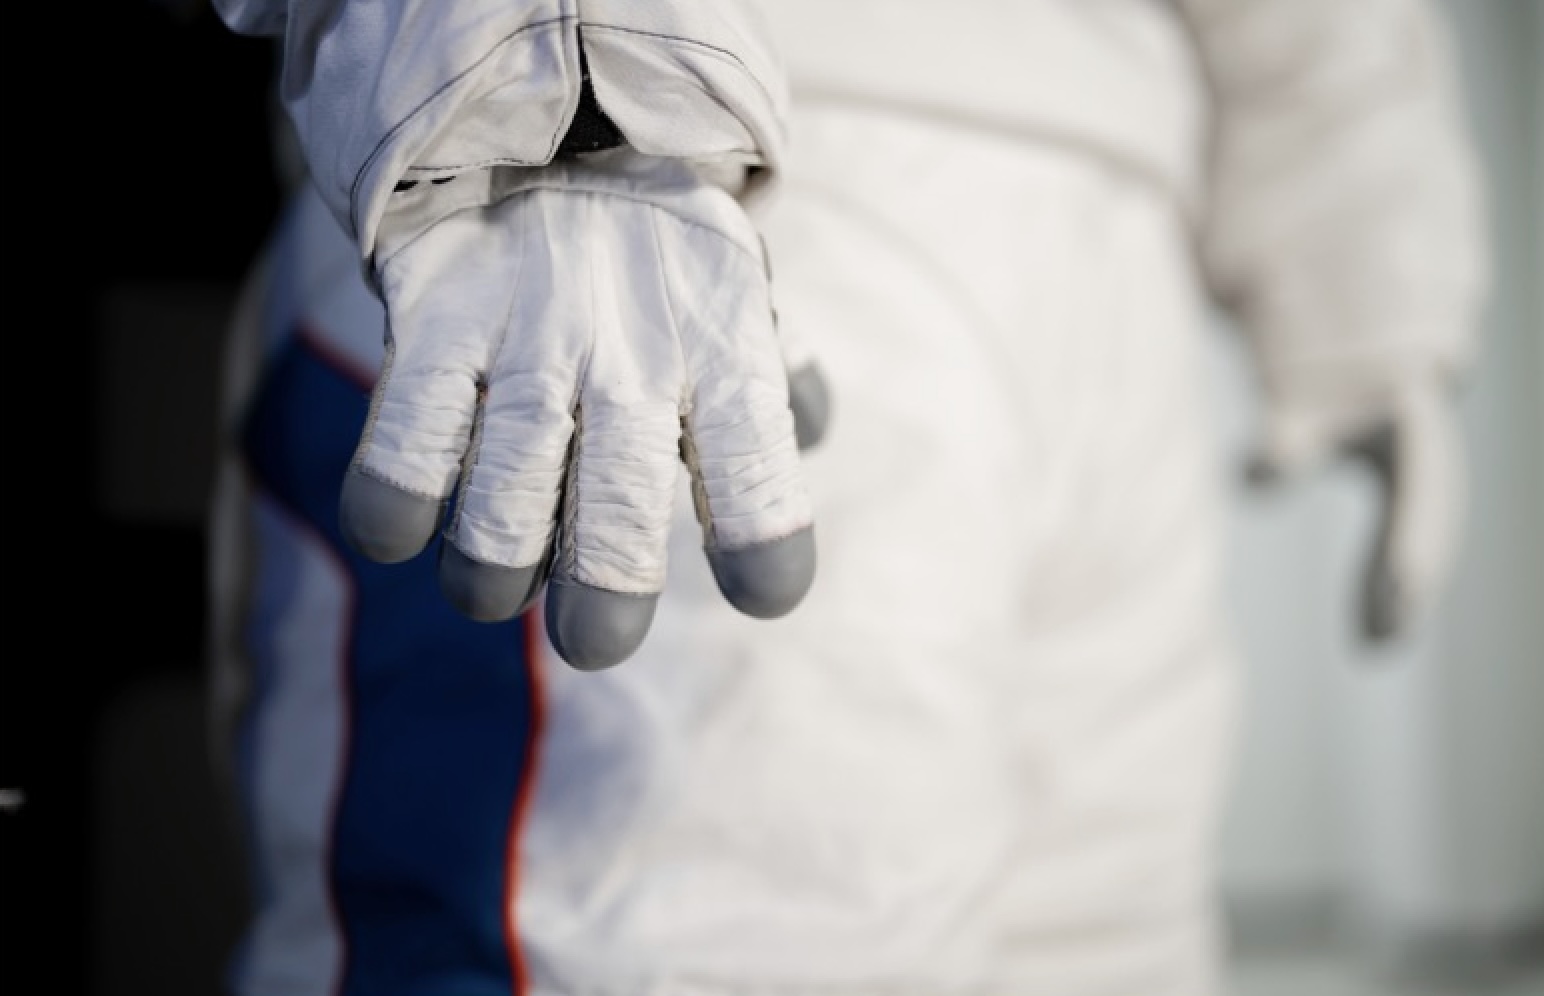 The new AxEMU custom glove design will enable astronauts to work with specialized tools to accomplish exploration needs and expand scientific opportunities. © Axiom Space